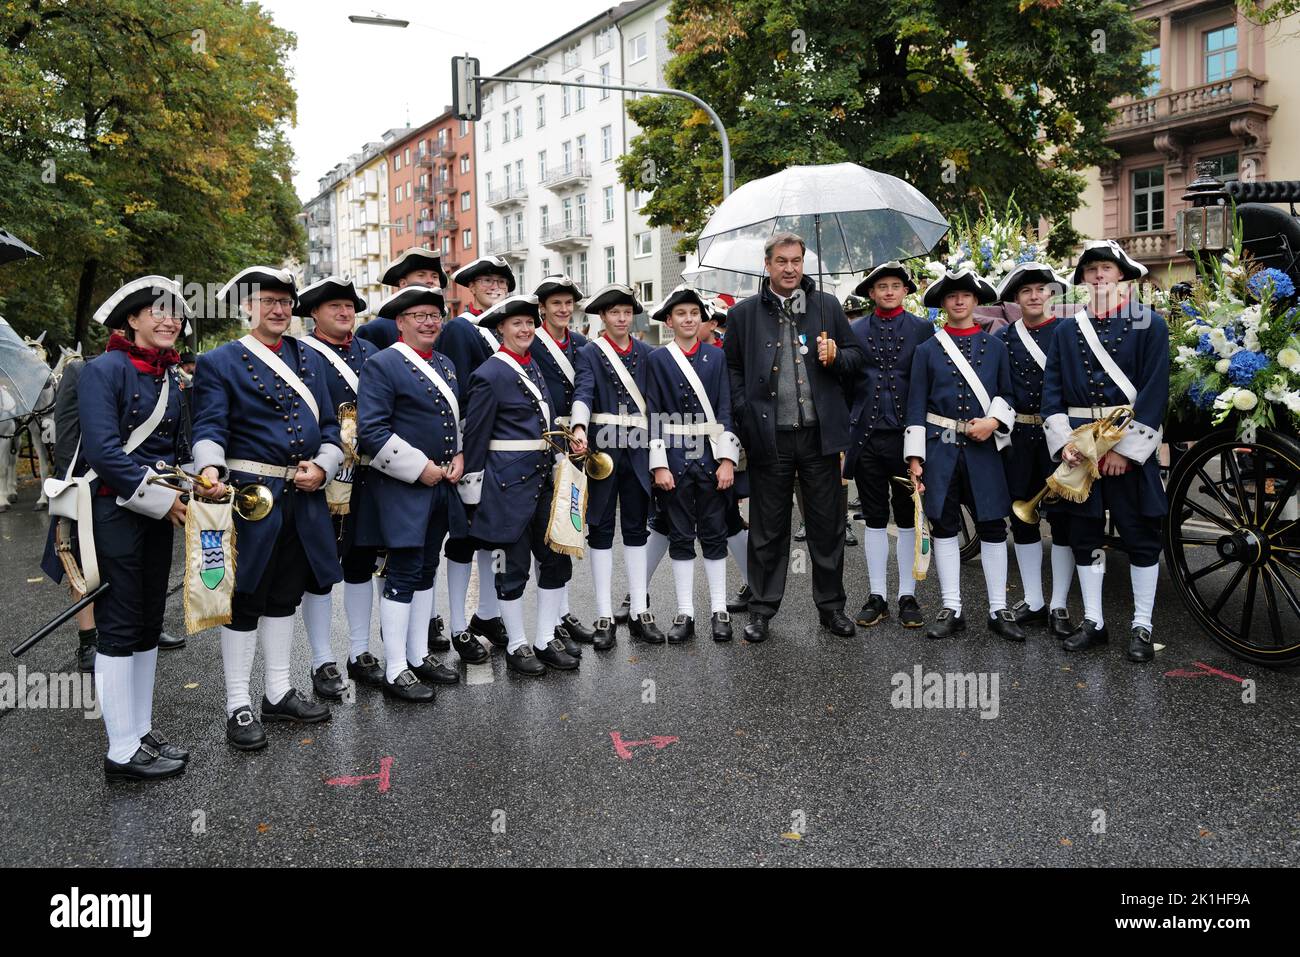 Munich, Germany.  18 Sep, 2022. Bavarian president, Markus Söder, poses for a picture before the start of today's parade in Munich. The Oktoberfest Costume and Riflemen's Parade took place today with early showers failing to dampen the spirits of all involved. Saturday's official opening saw crowds down on the last time the Oktoberfest was held but there were considerably more people out and about today despite the rain. Credit: Clearpiximages/Alamy Live News Stock Photo